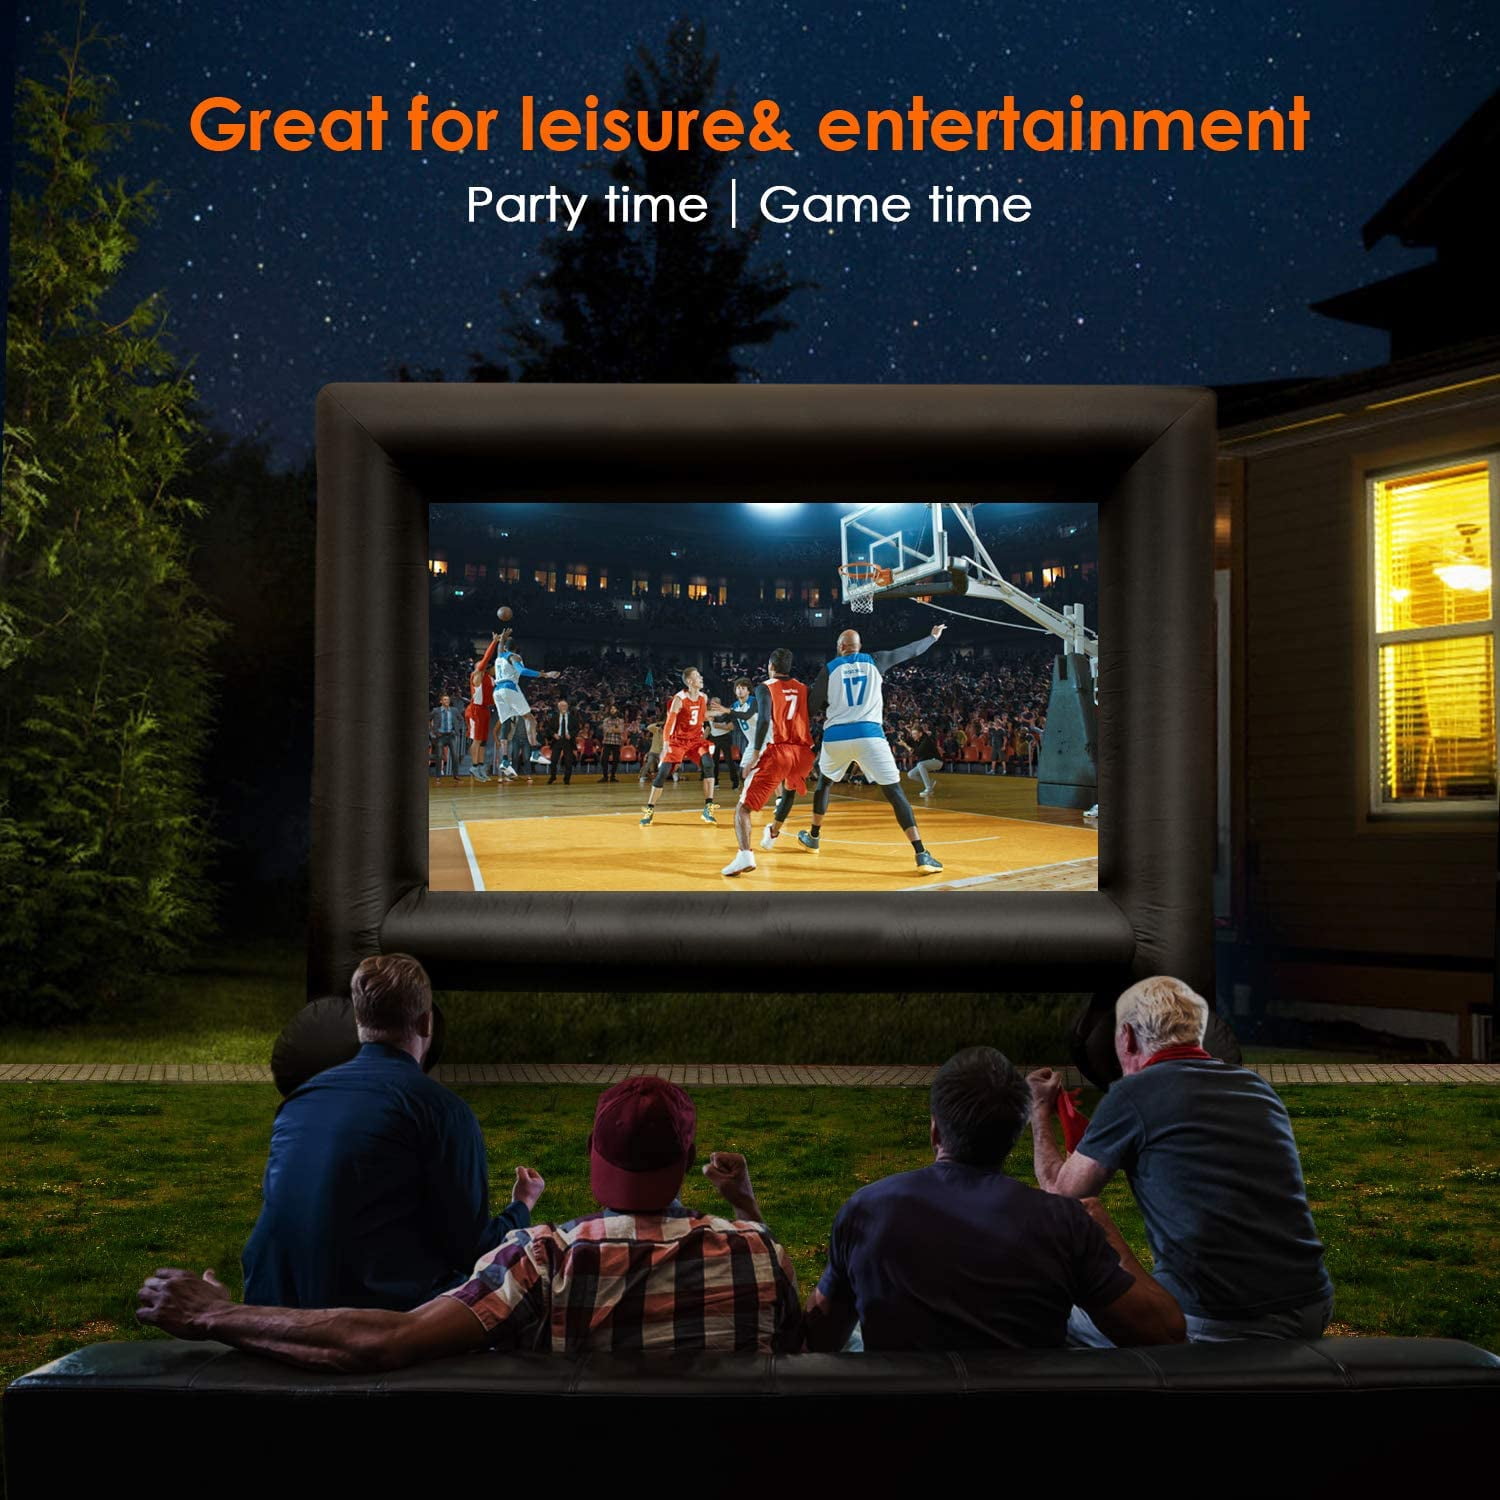 Ground Nails Front Quiet Fan and Rear Projection Home Theater with Storage Bag LATIPOPO Inflatable Movie Screen 14ft Outdoor Projection Blow Up Screen for Backyard 